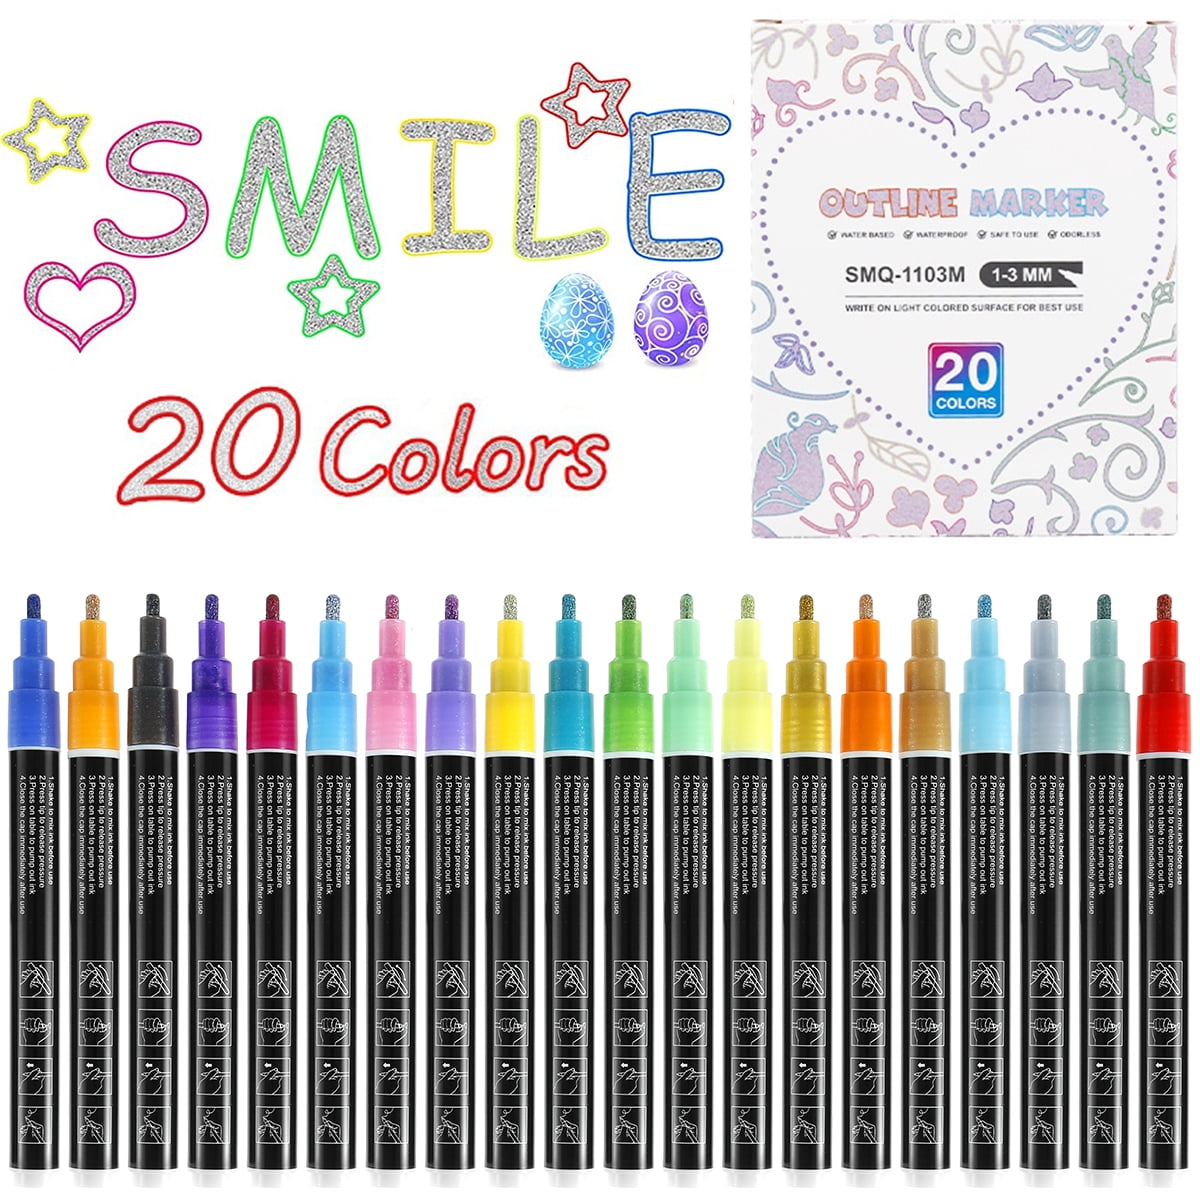 Brled 168+2 Colors Alcohol Markers, Free APP for Coloring, Dual